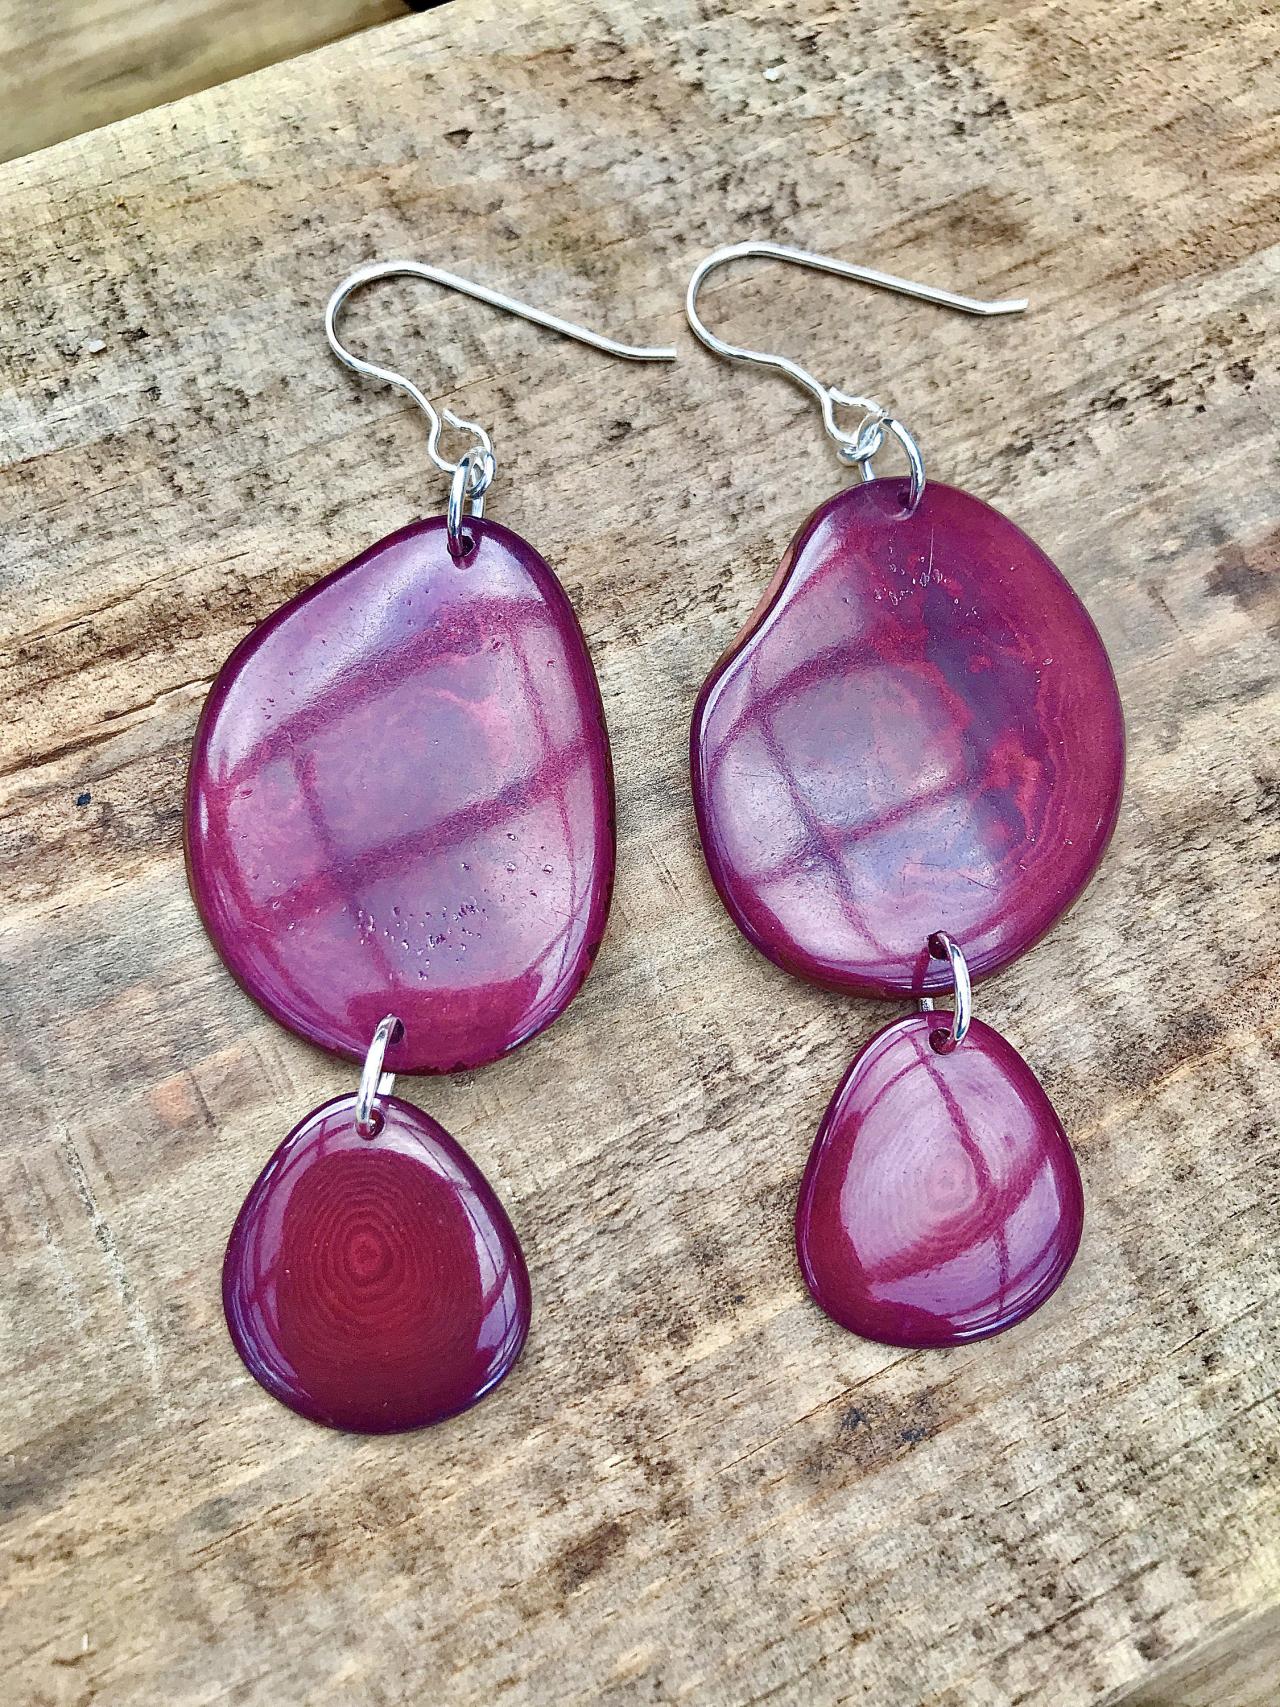 Wine Deep Red Tagua Nut (vegetable Ivory) Dangle Earrings With Sterling Silver Wires.